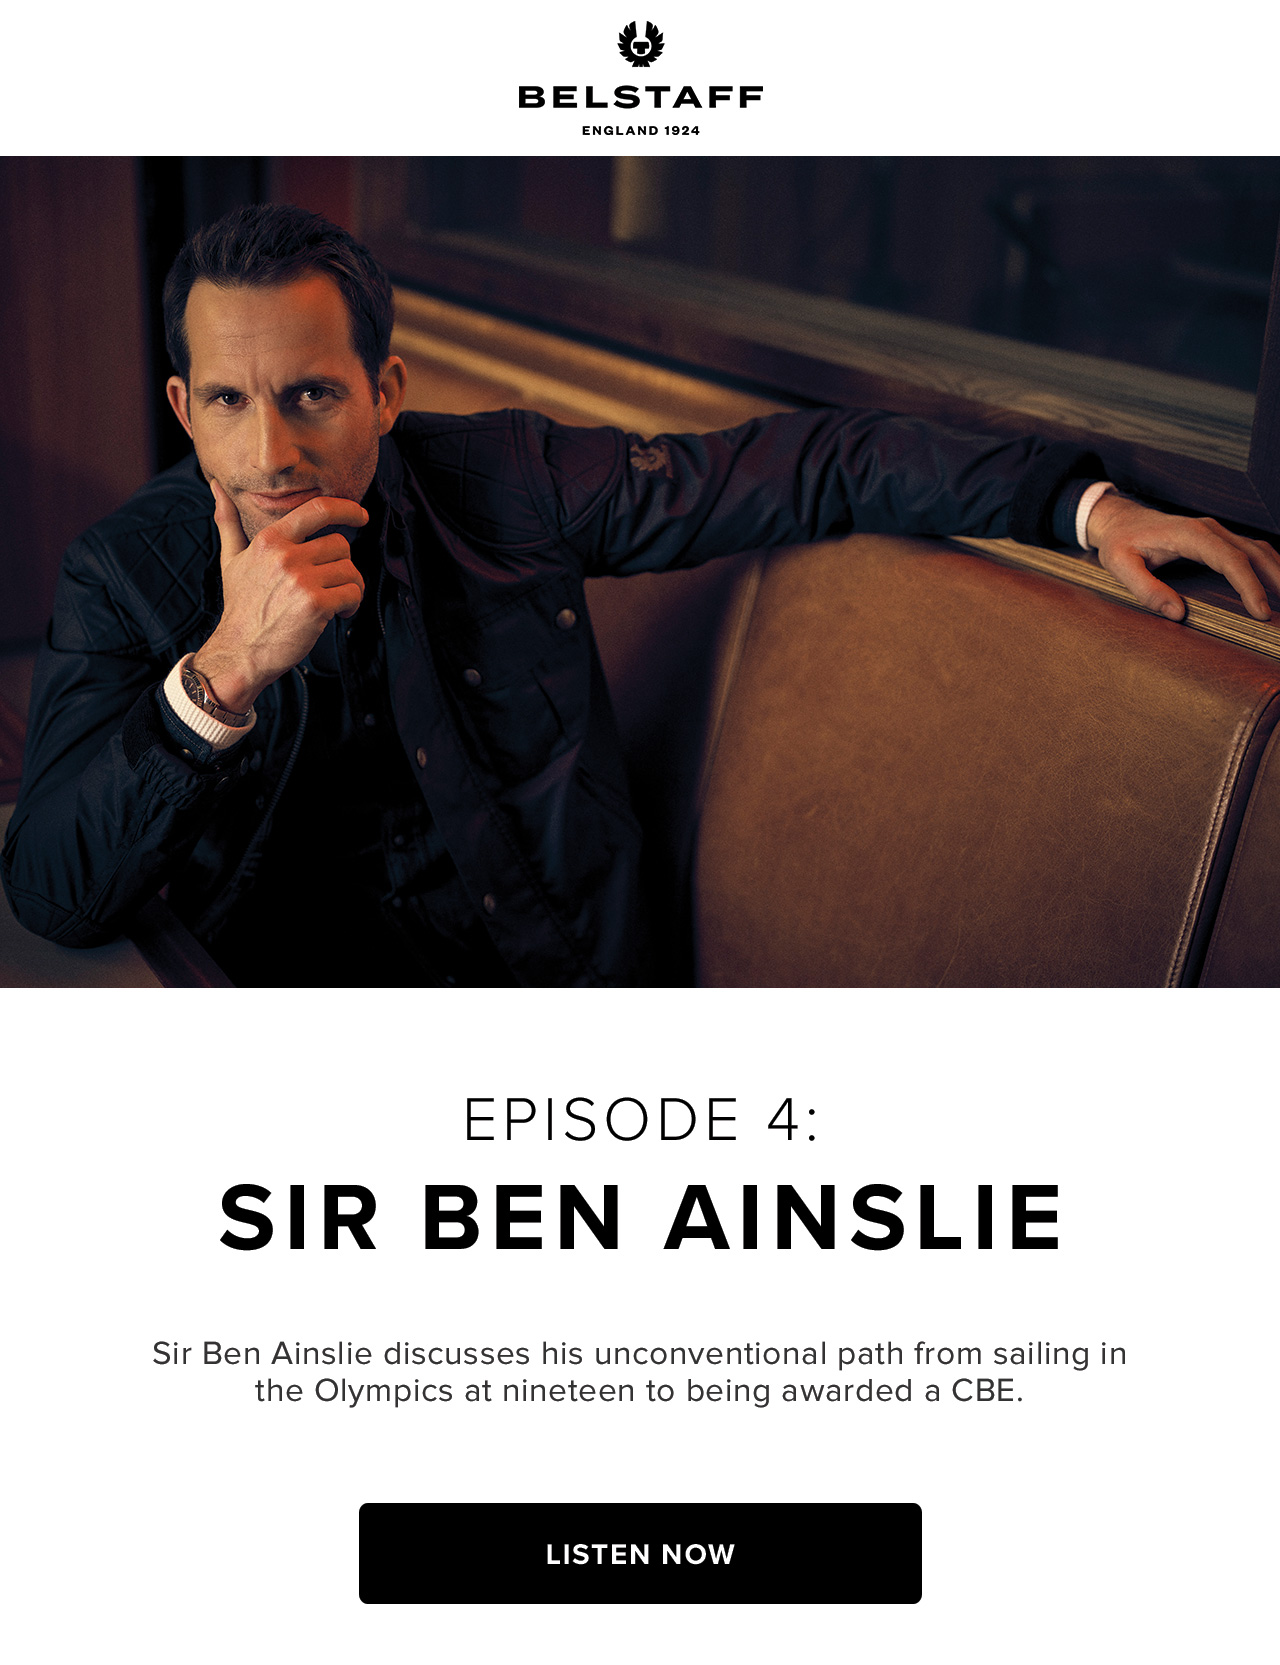 Sir Ben Ainslie discusses his unconventional path from sailing in the Olympics at nineteen to being awarded a CBE.